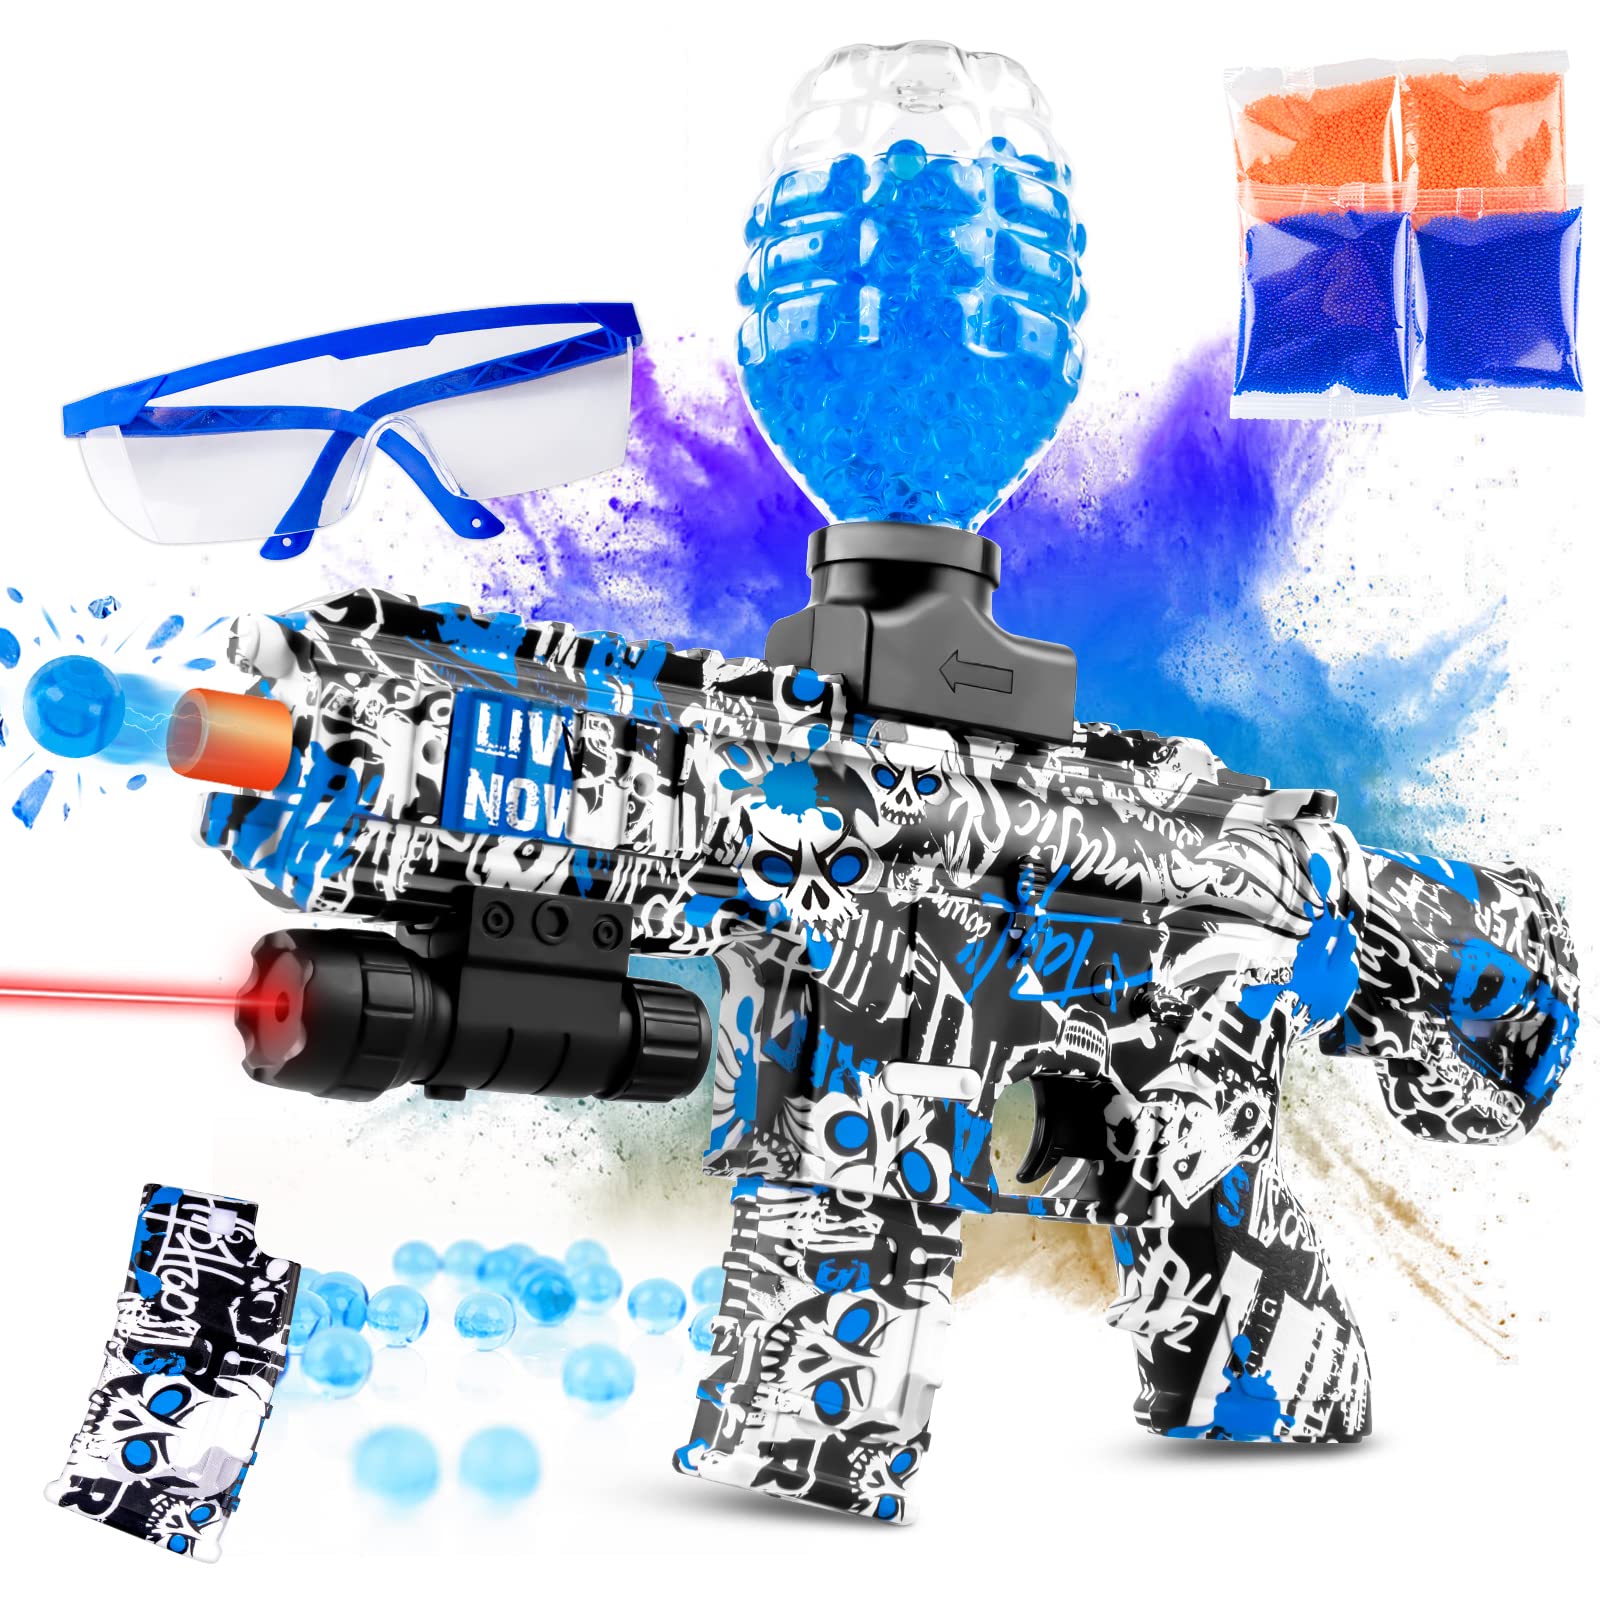 Gel Splatter Cool Ball Toy M416 with Goggles and 50,000 Water Beads Suitable for Backyard Fun and Outdoor Team Shooting Games For Unisex Kid, Over 12+